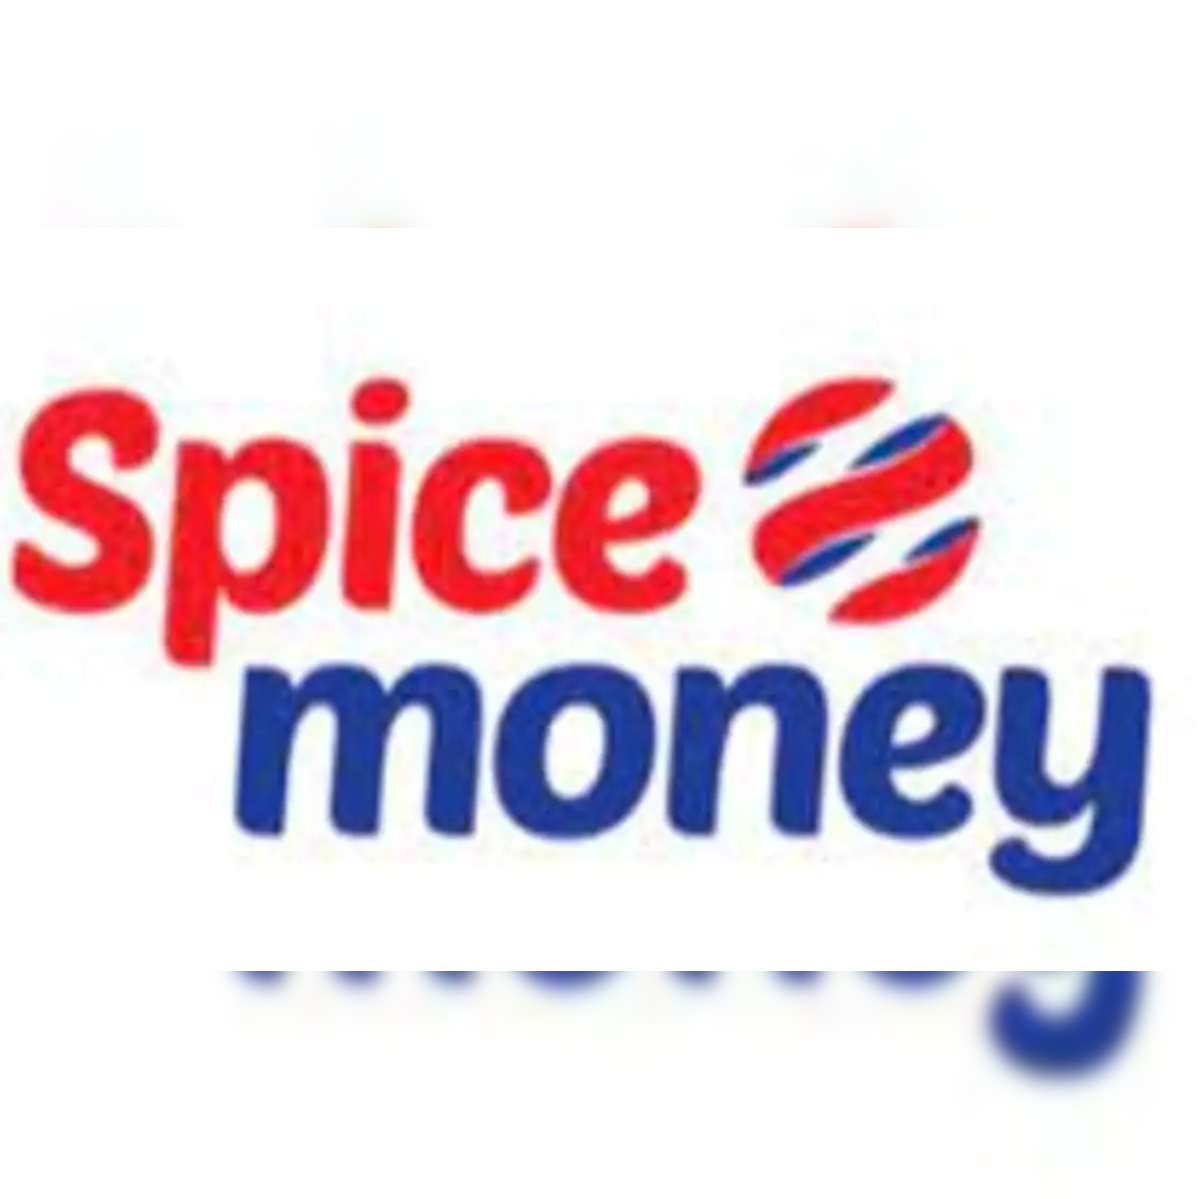 Contact to get Spice Money ID. ✓8003990499📲 Spice Money's digital services  have helped connect rural India with city-like amenities. The dreams of  lakhs... | By SVG Express Services Pvt. Ltd.Facebook